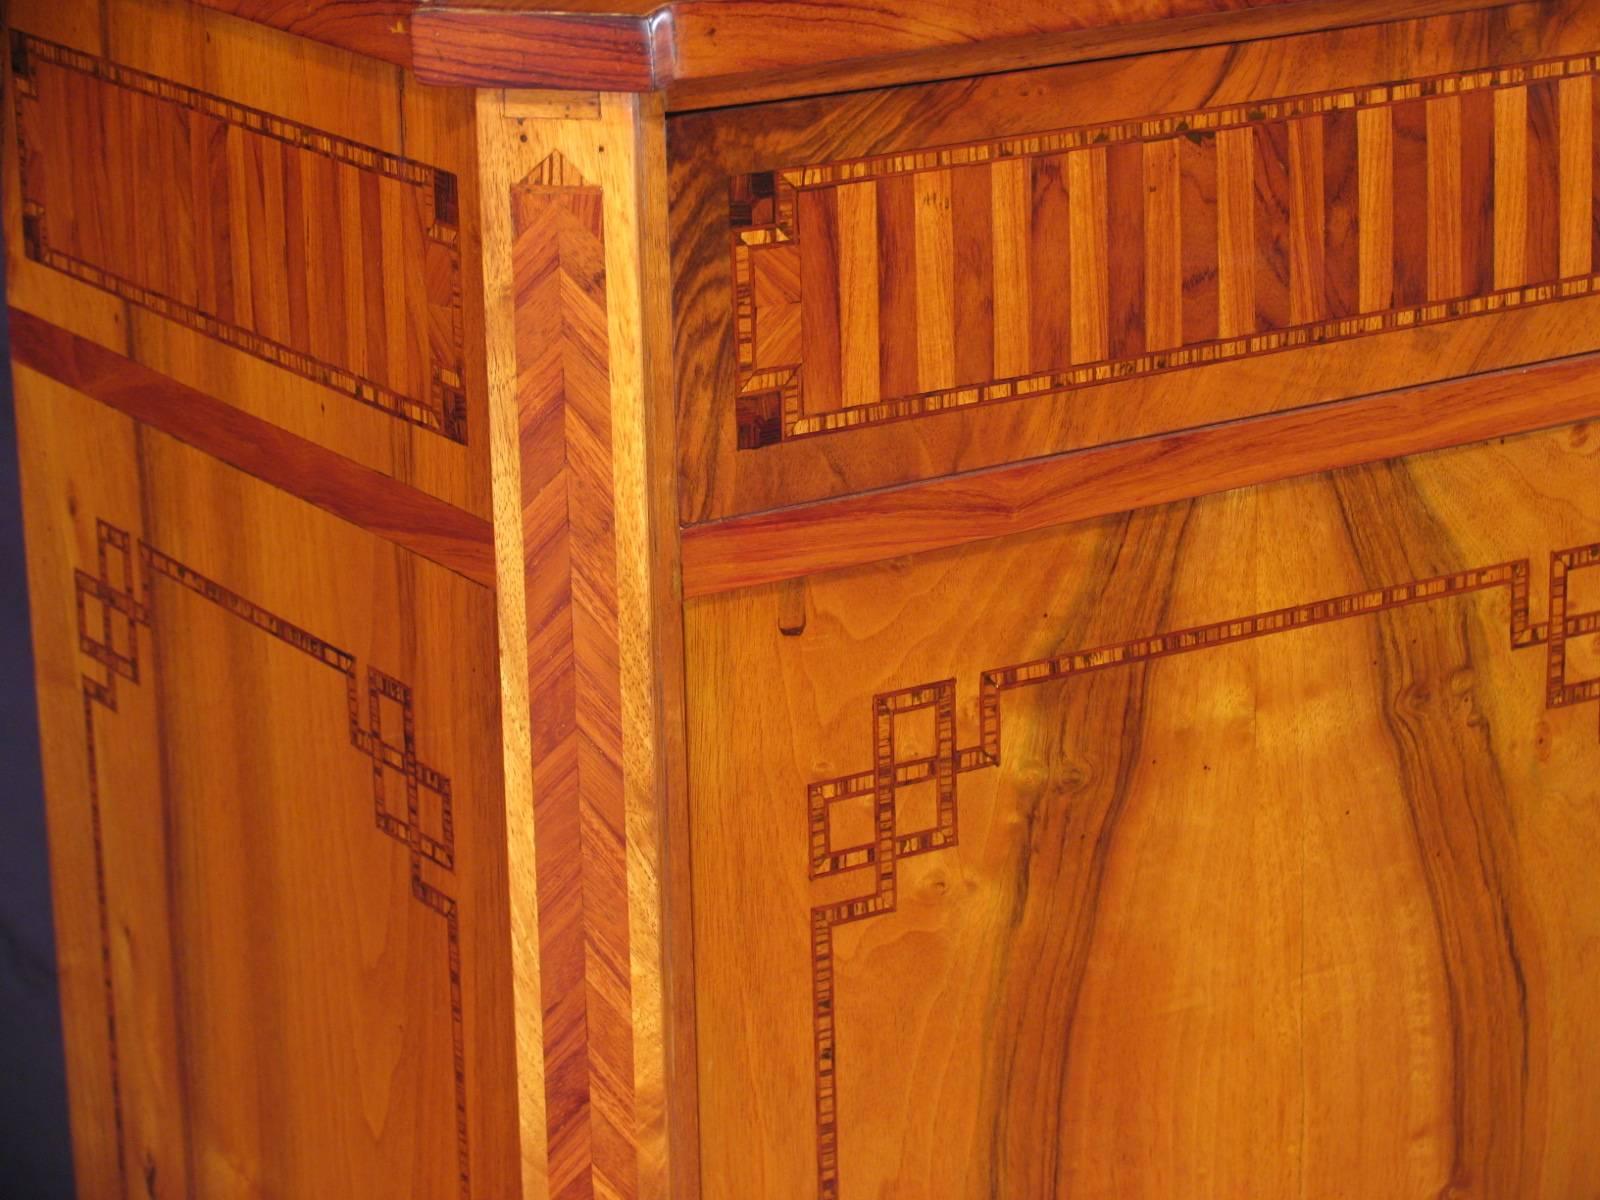 Unique Louis XVI sideboard, Germany, probably Frankfurt, 1780. Exceptional marquetry made of walnut, kingwood and other exotic woods. The sideboard is professionally refinished and French polished. 